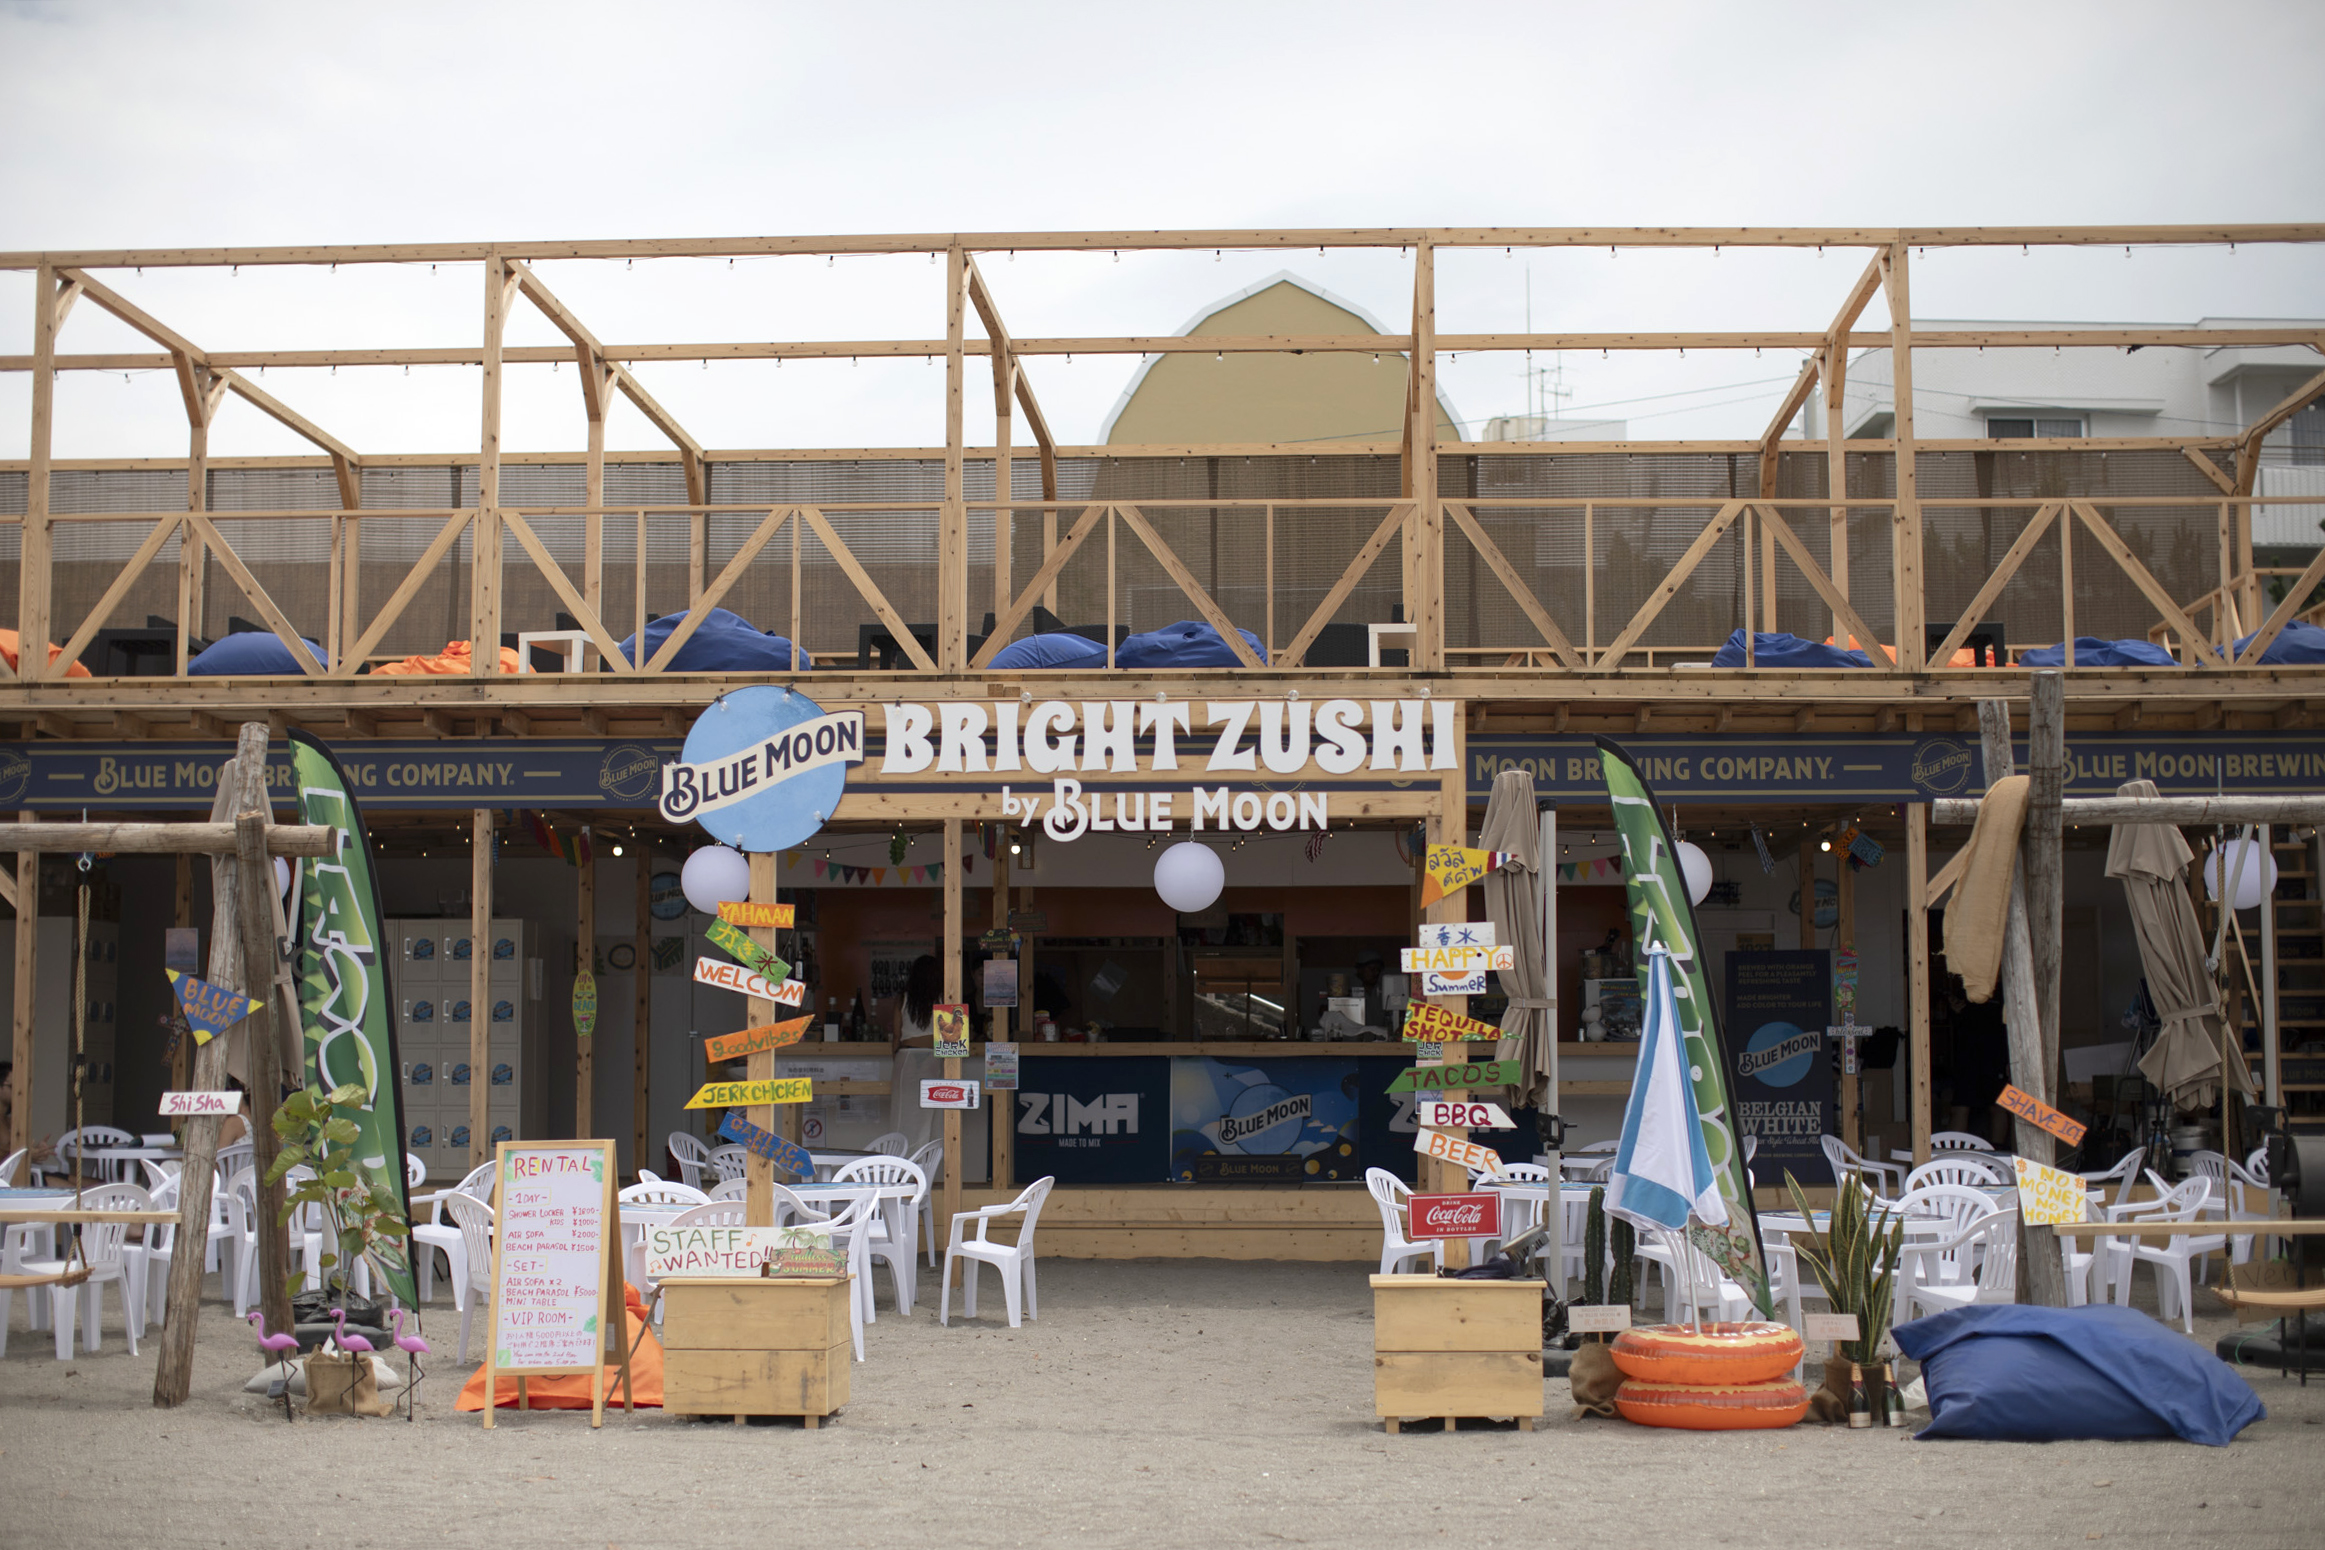 BRIGHT ZUSHI by BLUE MOON